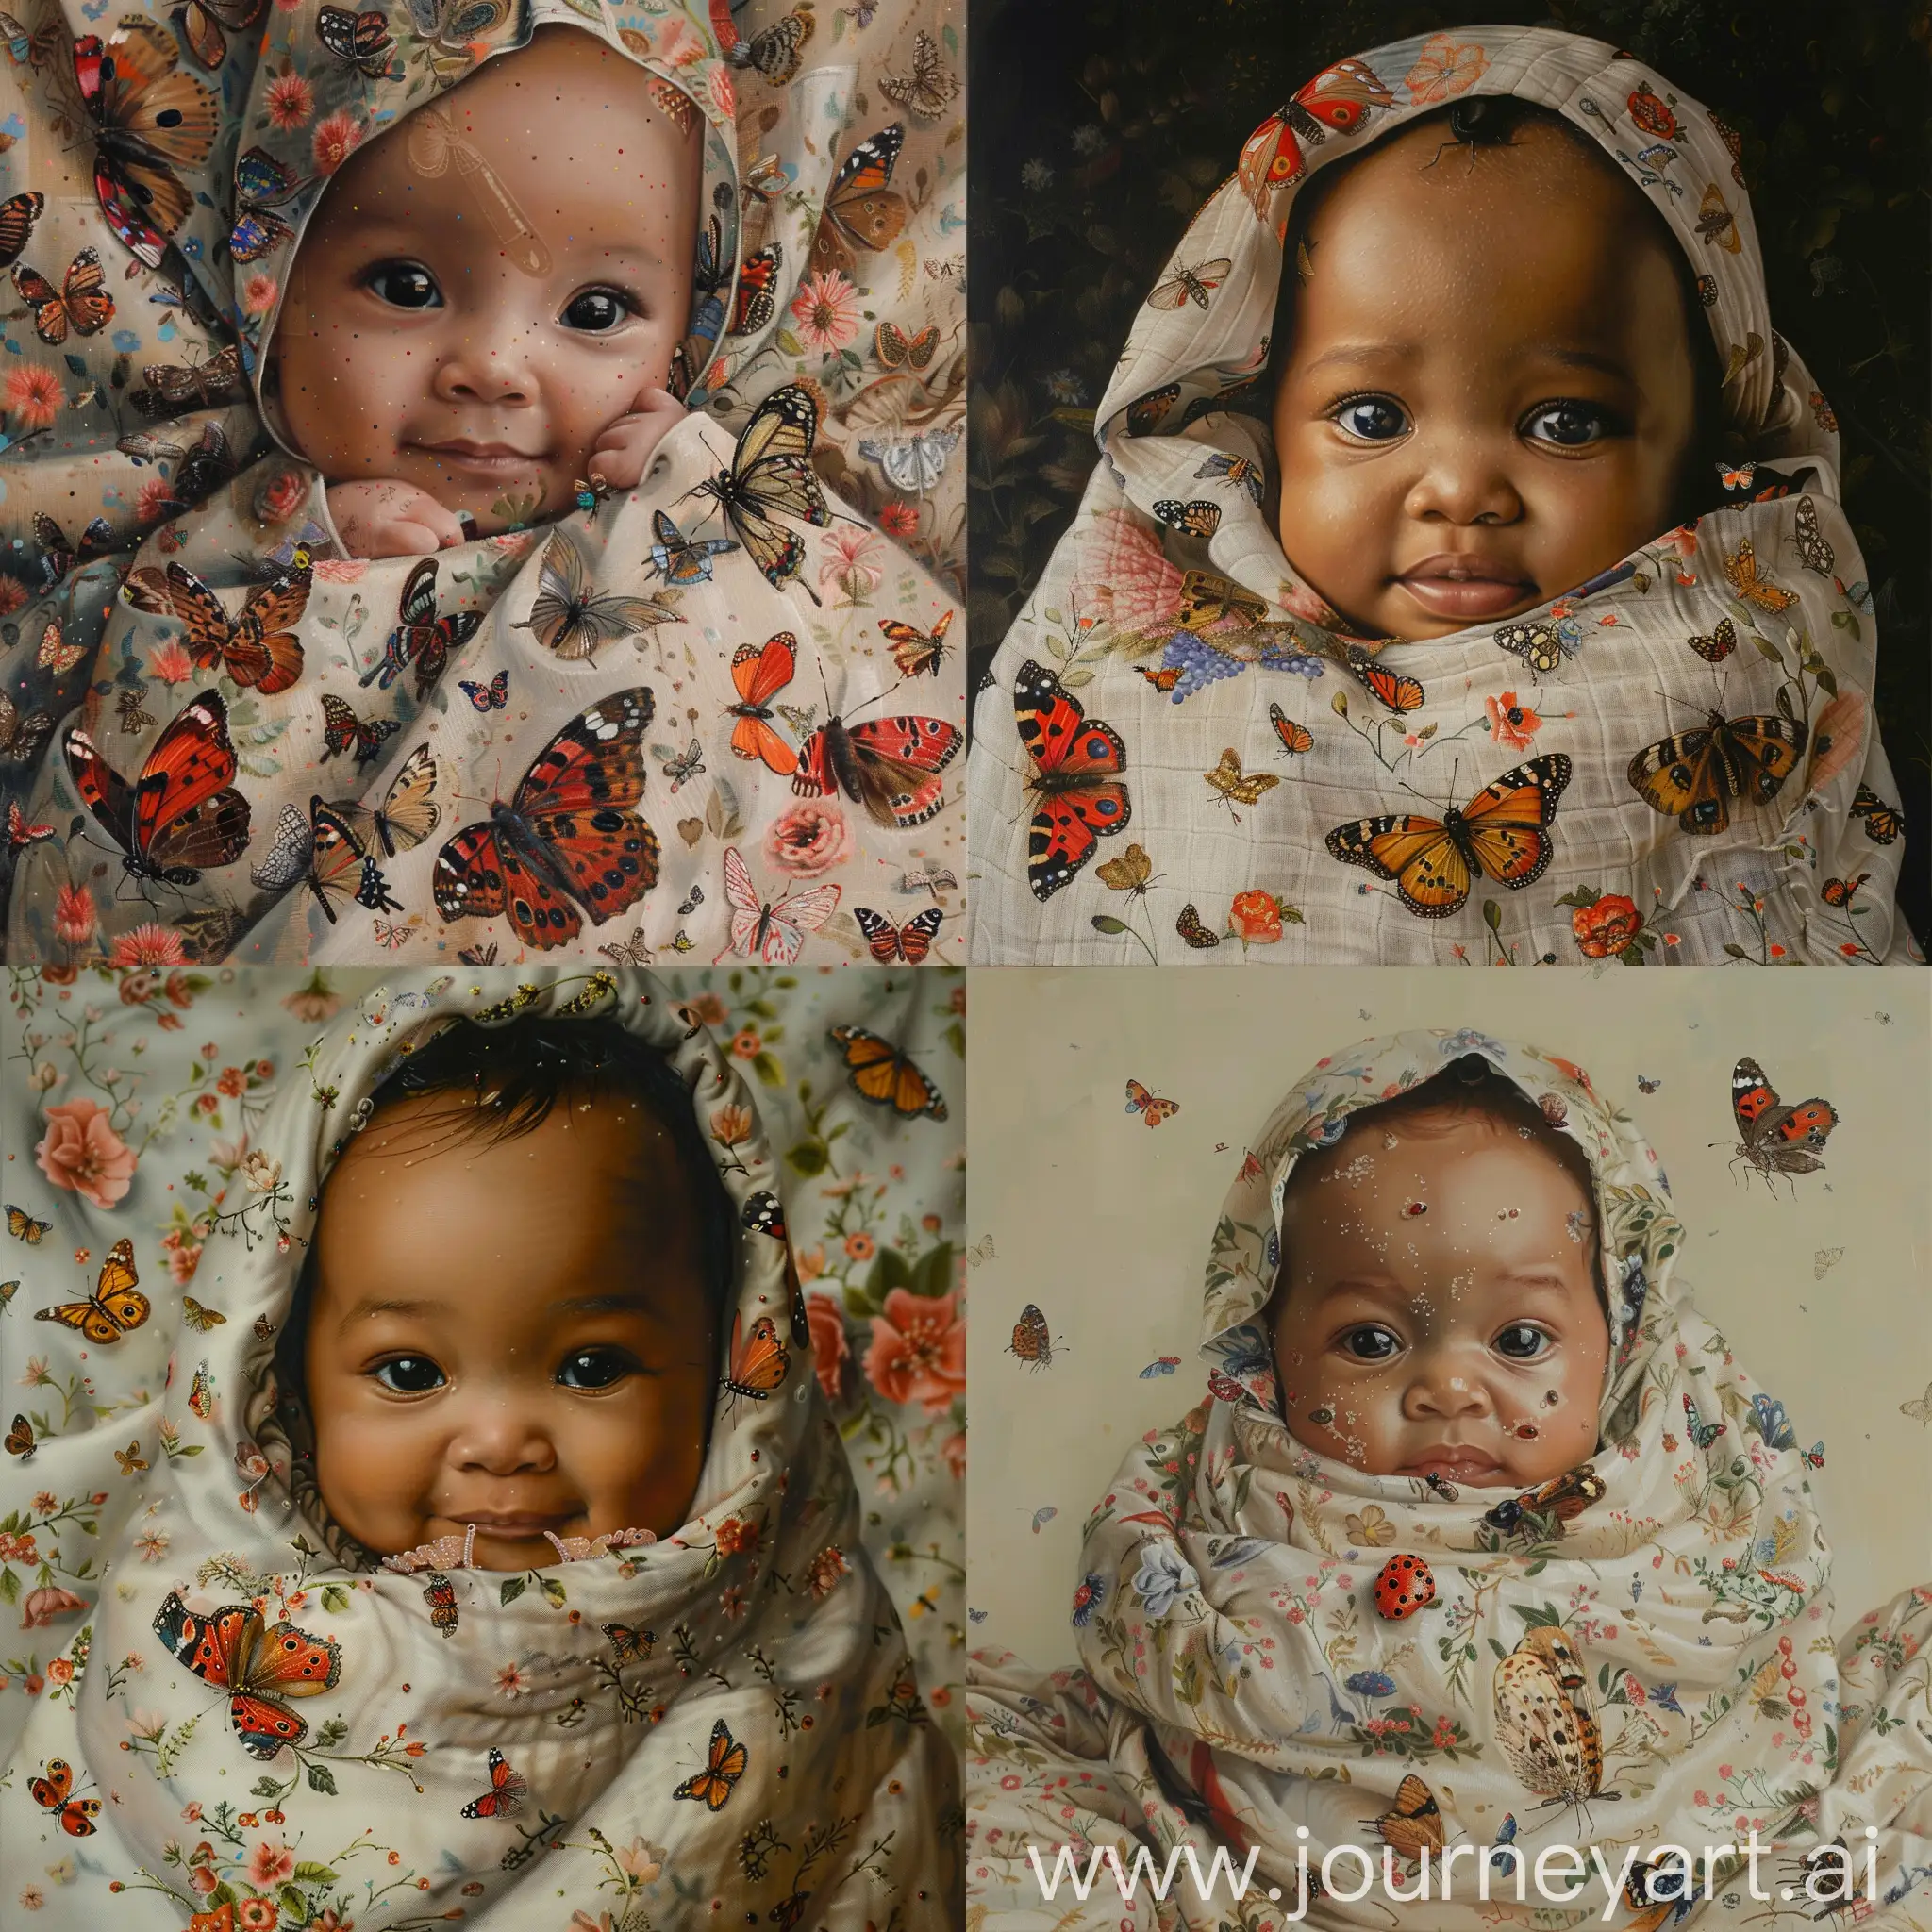 Oil painting of a beautiful newborn fair complexioned Nigerian baby girl covered with soft cloth on which there are tiny images of butterflies, ladybirds and flowers